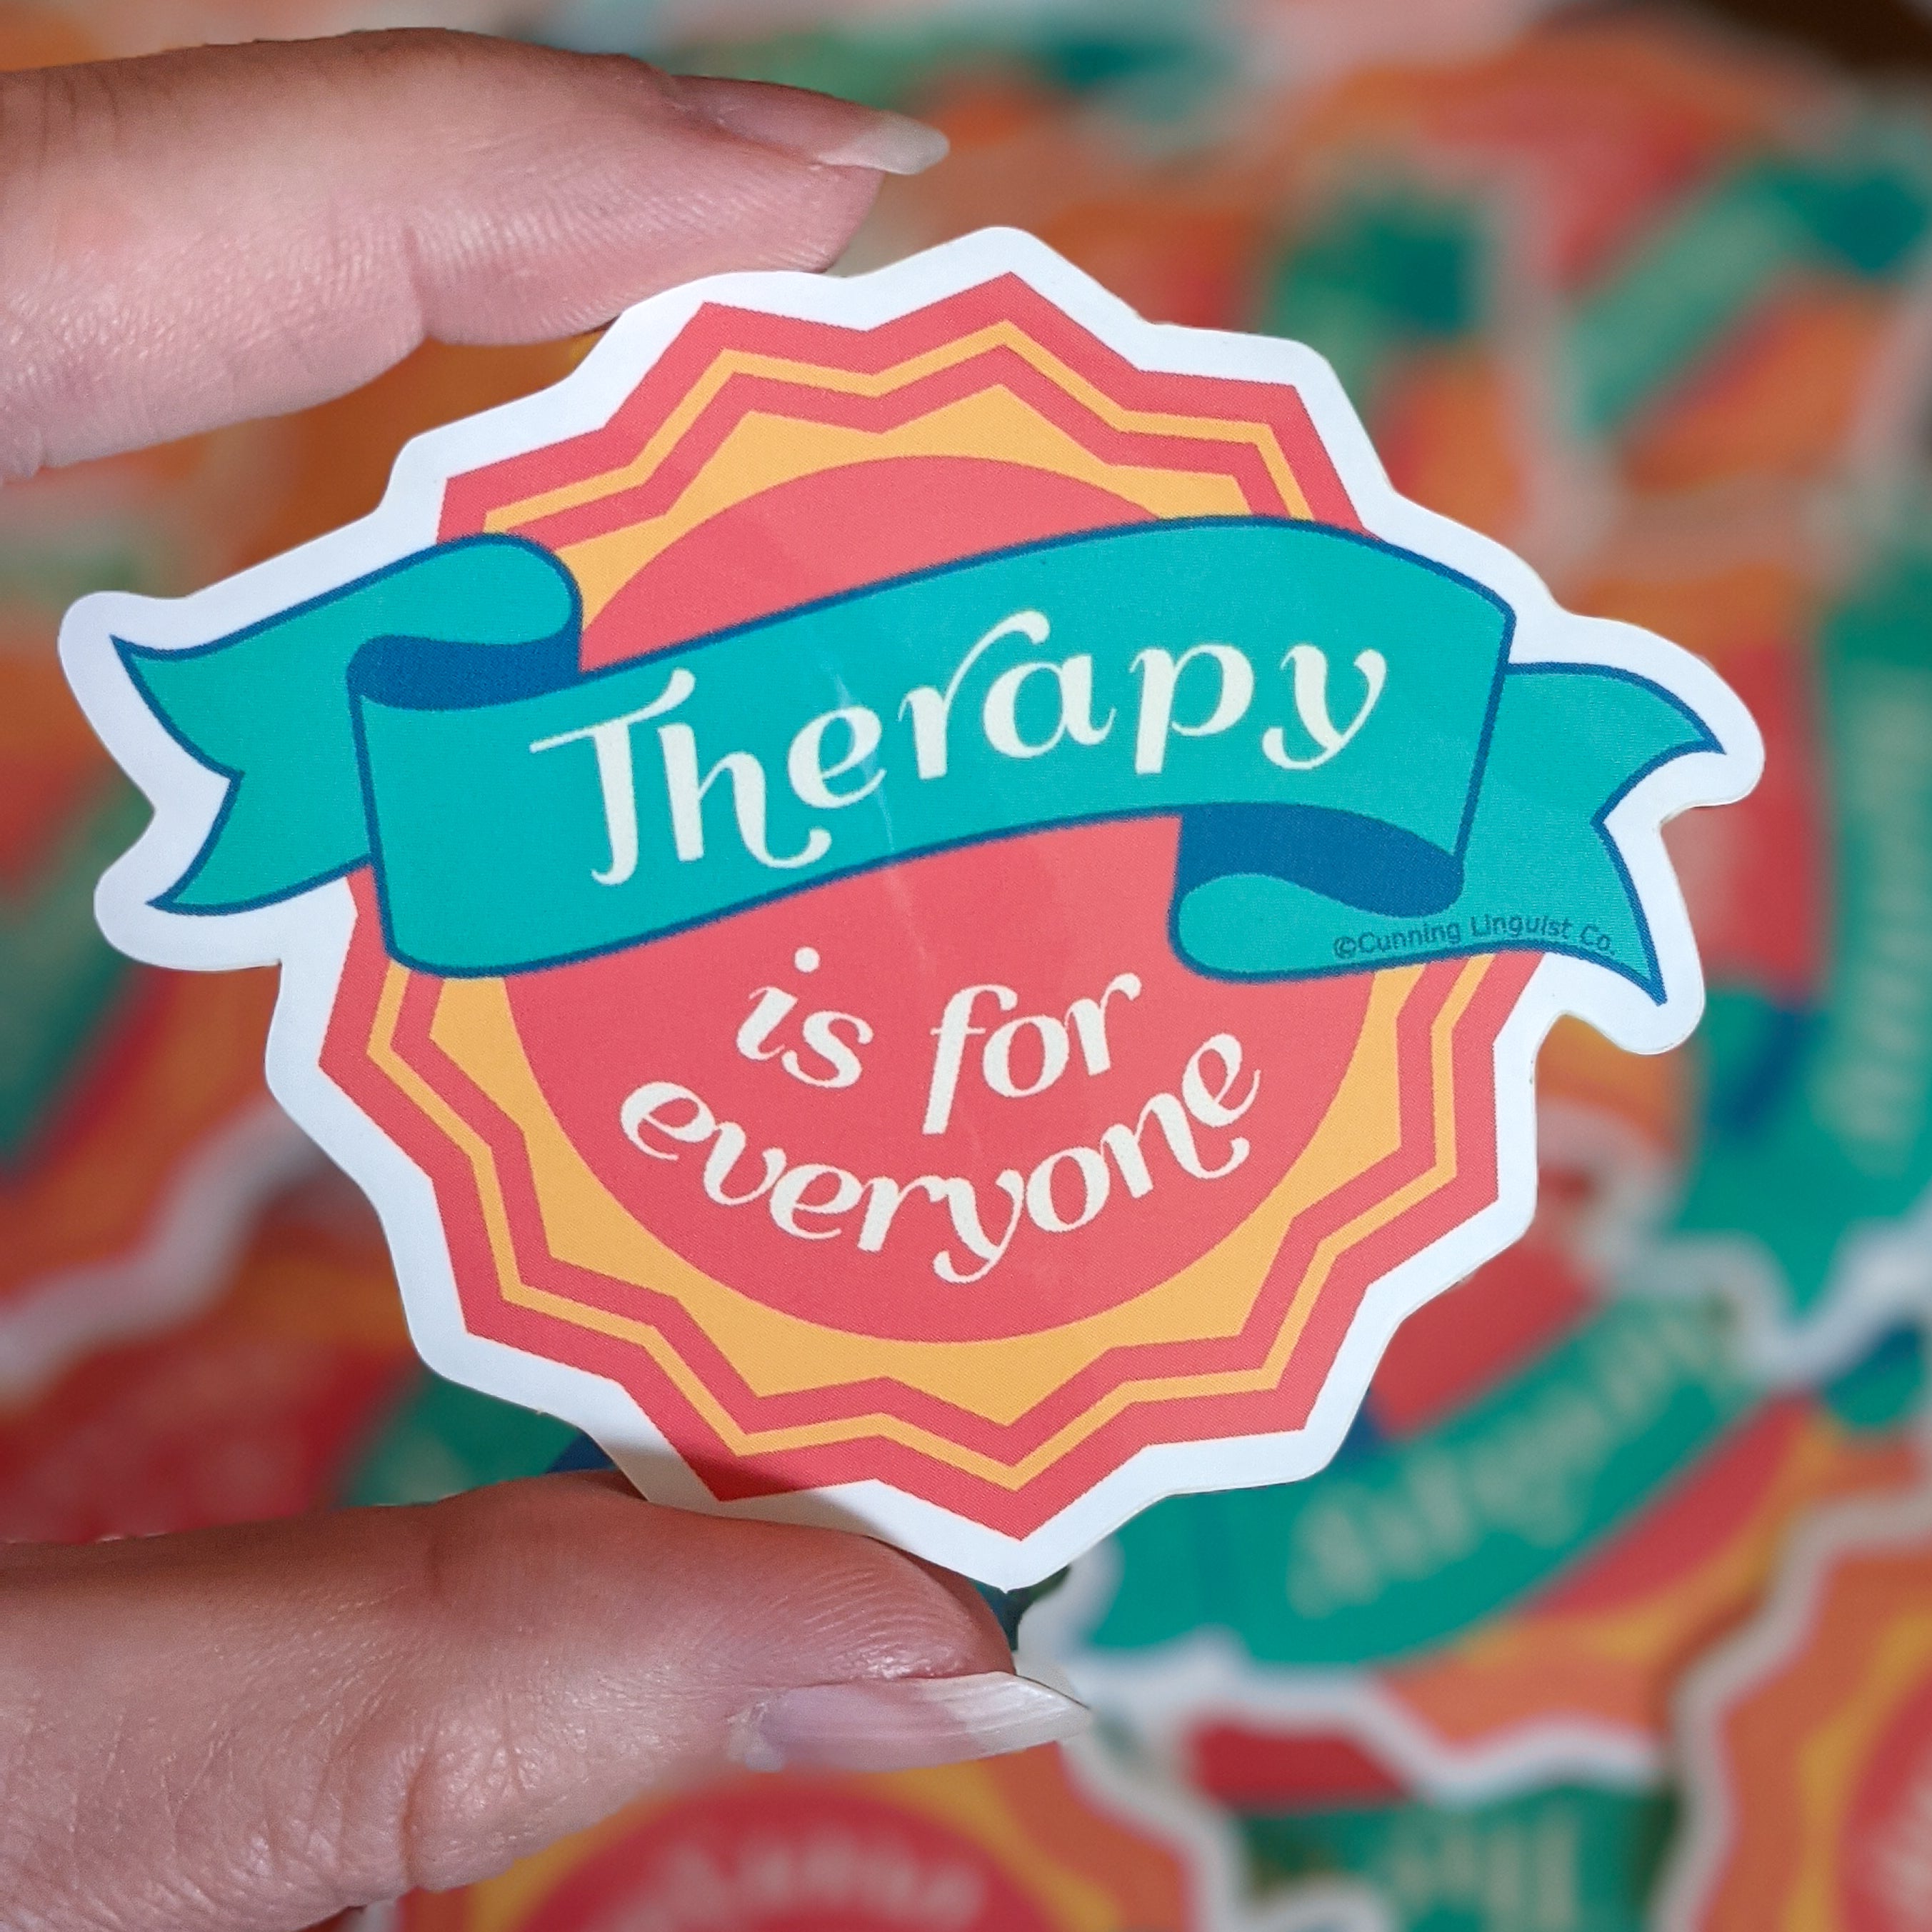 Therapy For Everyone sticker